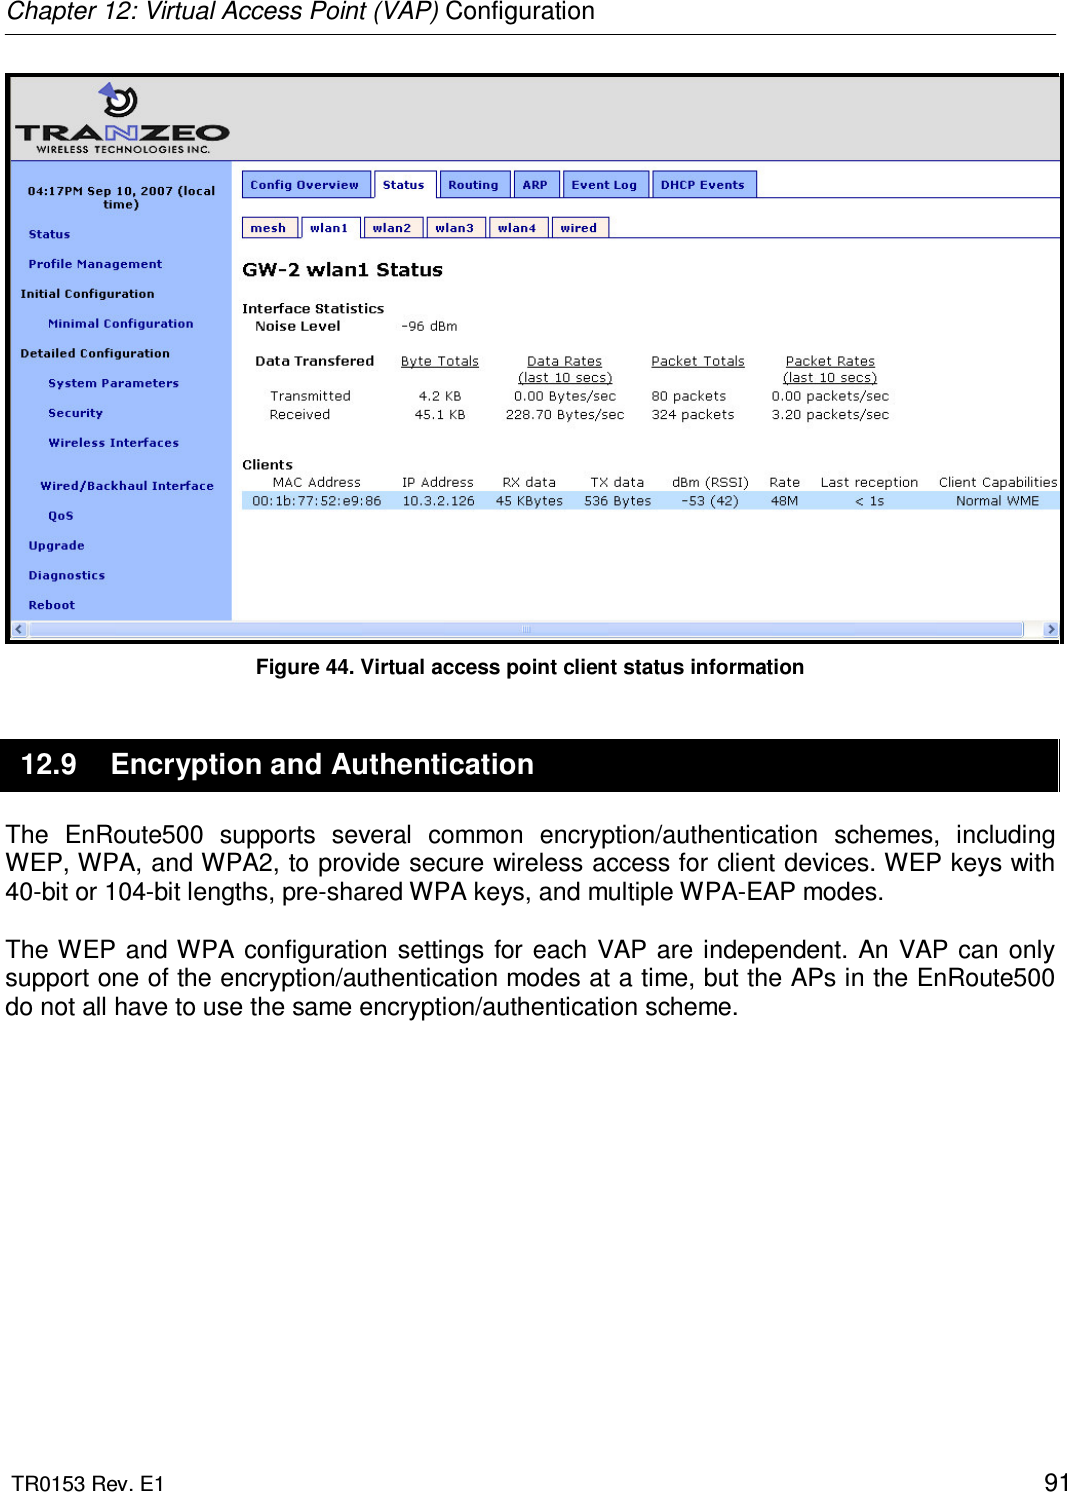 Chapter 12: Virtual Access Point (VAP) Configuration  TR0153 Rev. E1    91  Figure 44. Virtual access point client status information 12.9  Encryption and Authentication The  EnRoute500  supports  several  common  encryption/authentication  schemes,  including WEP, WPA, and WPA2, to provide secure wireless access for client devices. WEP keys with 40-bit or 104-bit lengths, pre-shared WPA keys, and multiple WPA-EAP modes.   The WEP  and WPA configuration  settings  for each  VAP are independent. An VAP can  only support one of the encryption/authentication modes at a time, but the APs in the EnRoute500 do not all have to use the same encryption/authentication scheme.  